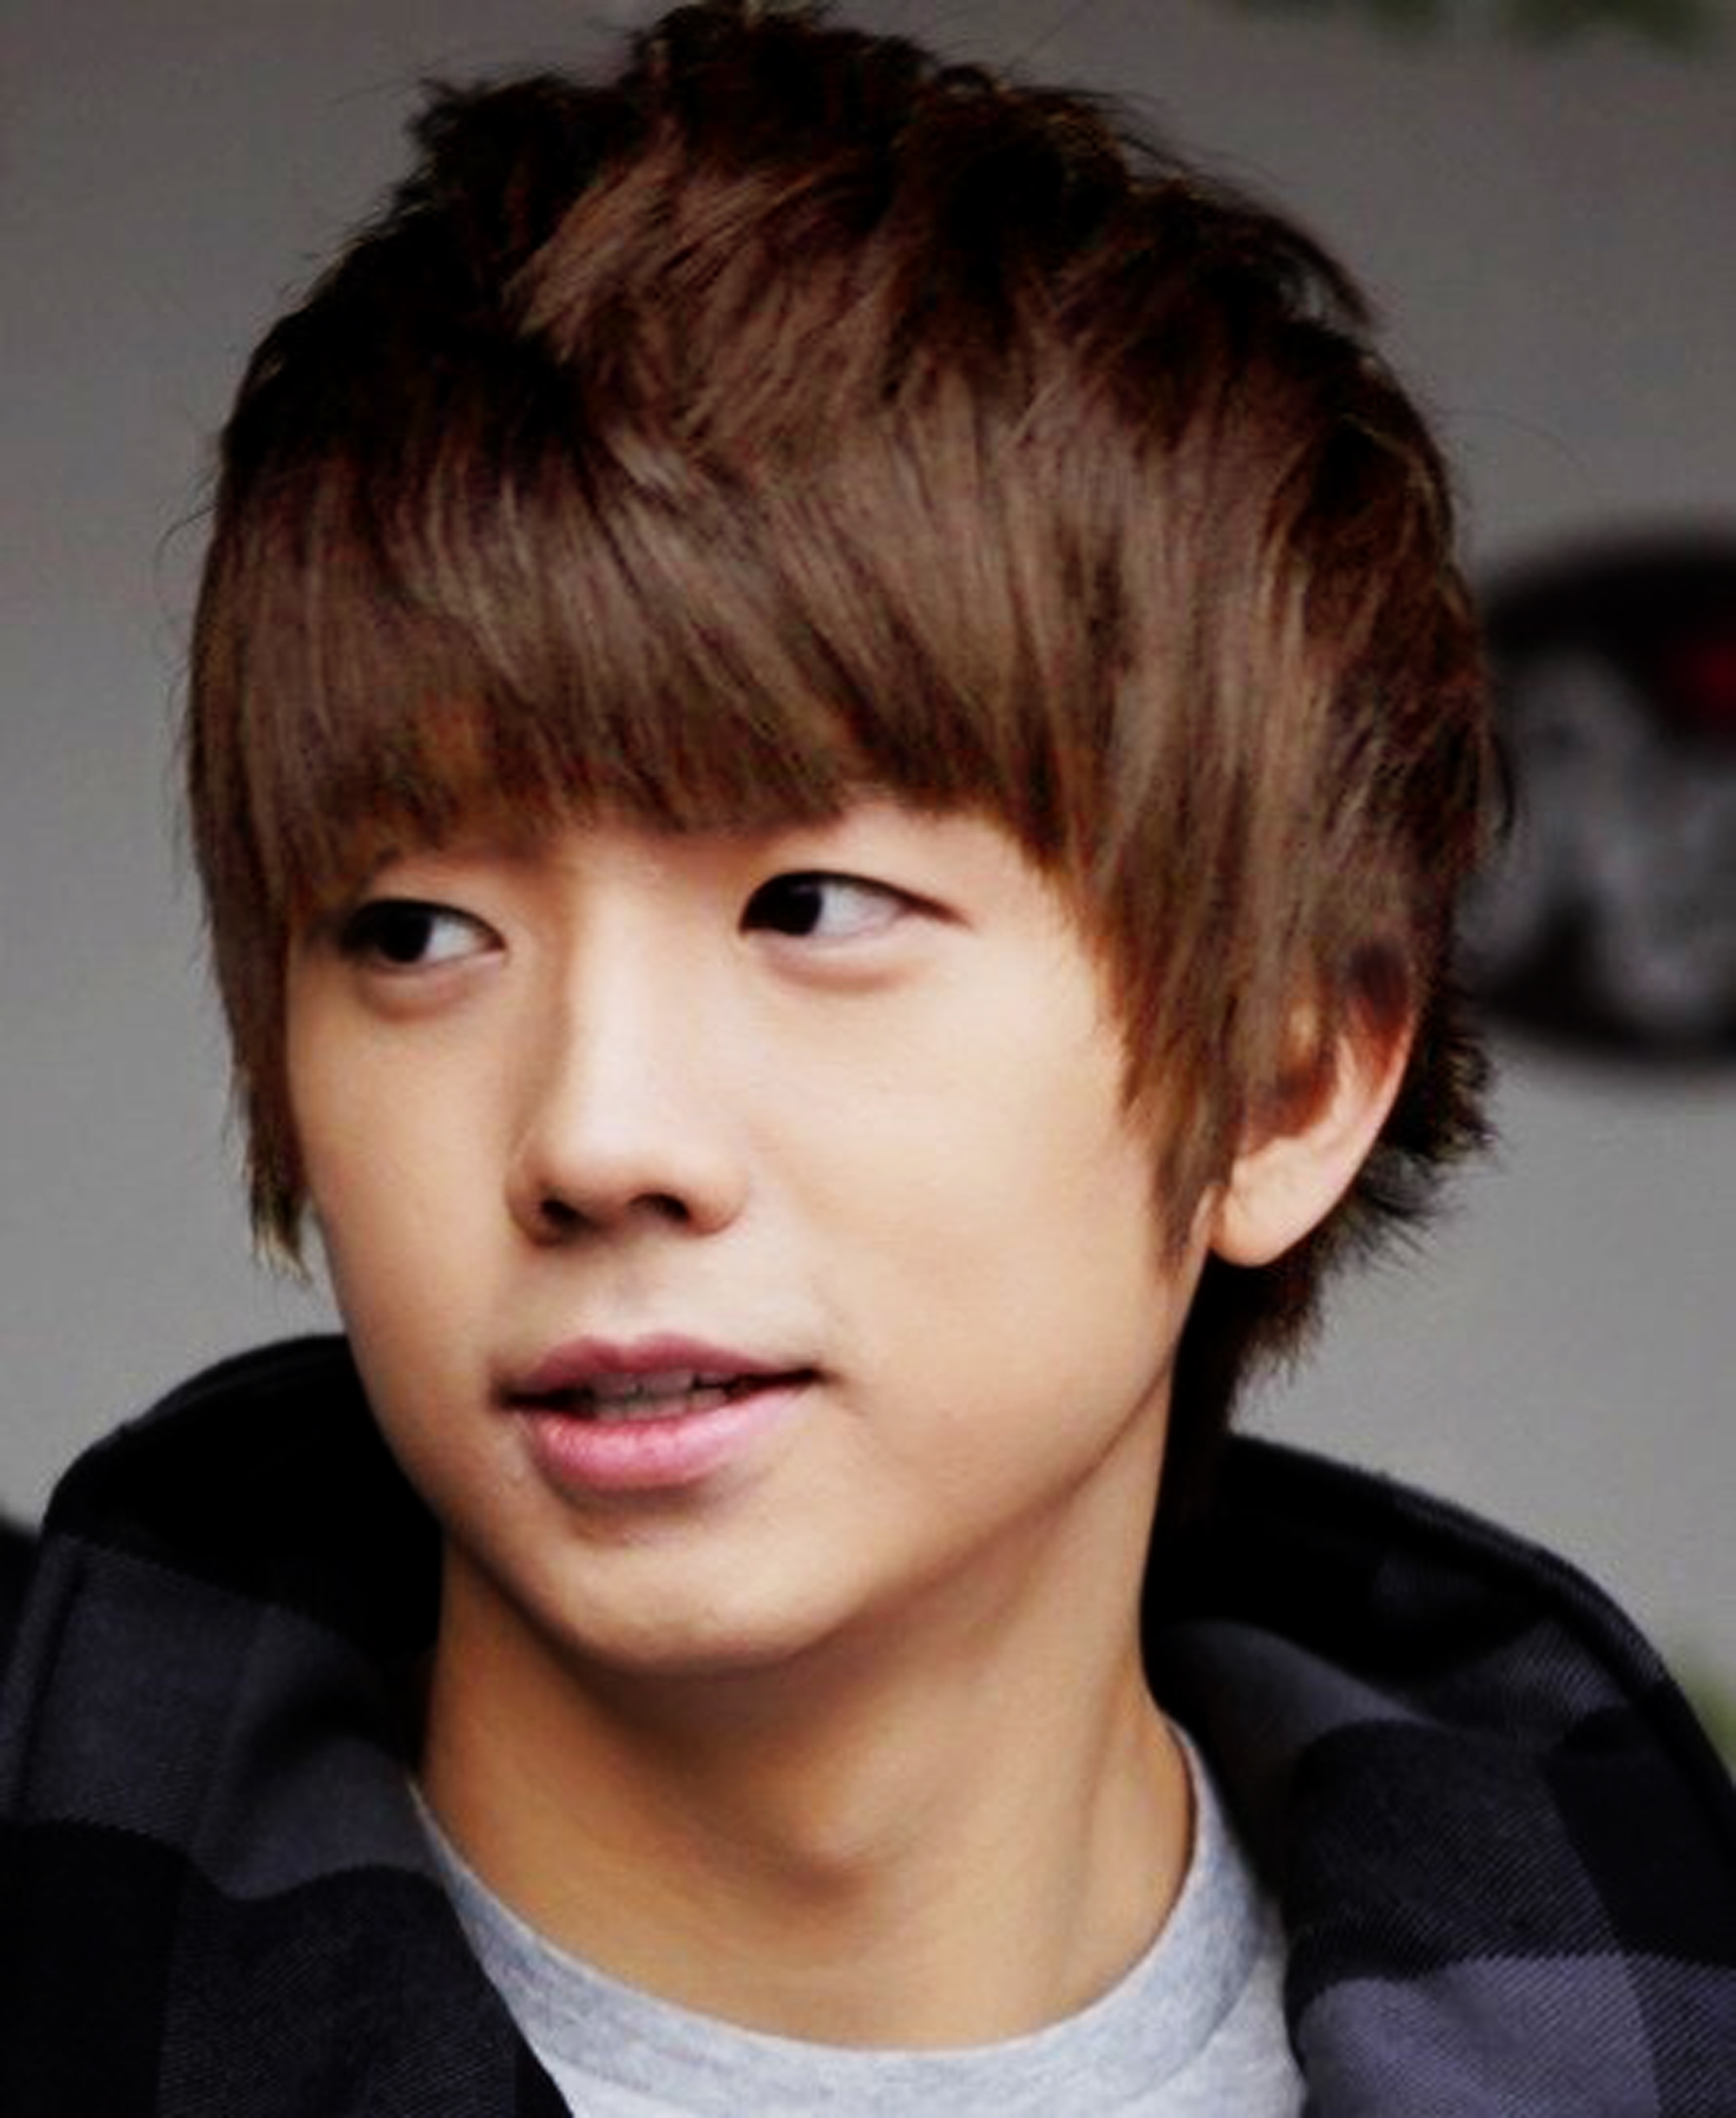 Wooyoung_by_StobbyxSwimmer.jpg